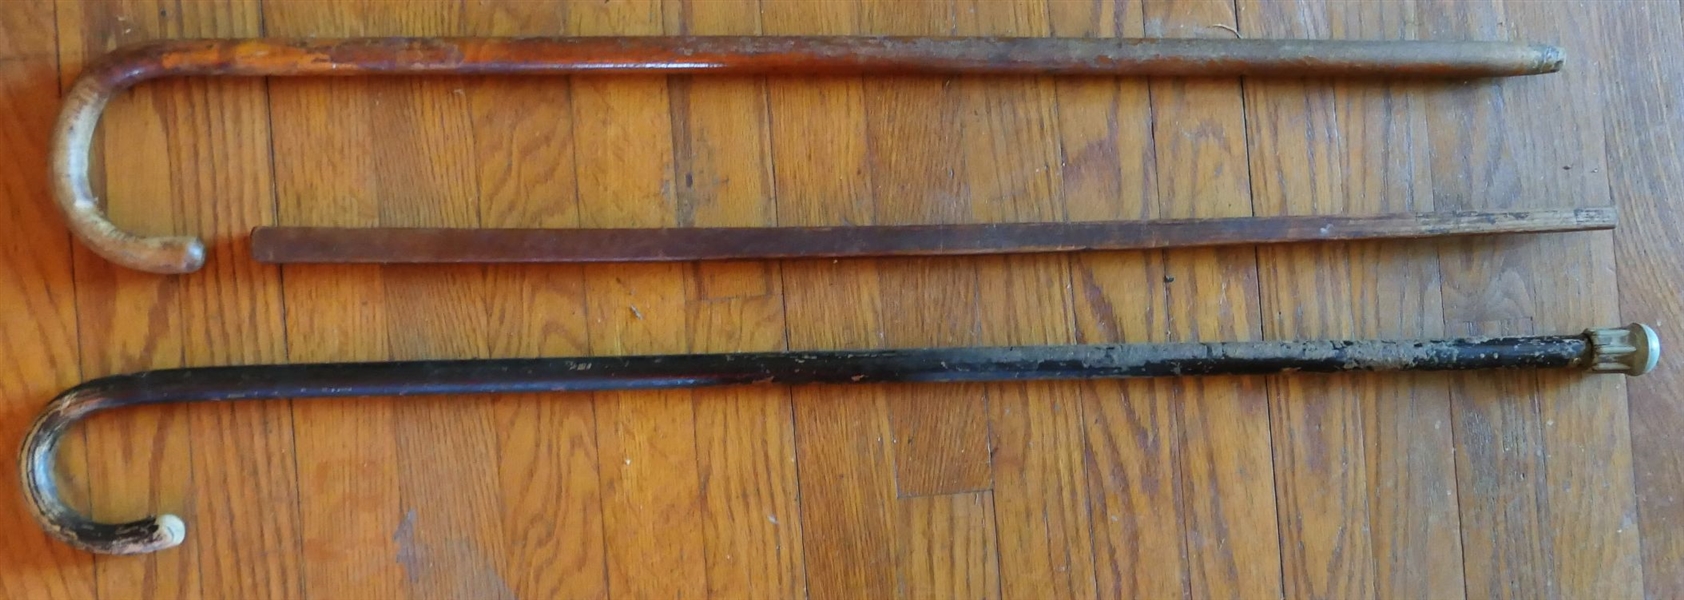 2 Wood Walking Canes and Wood Stick - Canes Measure 36"